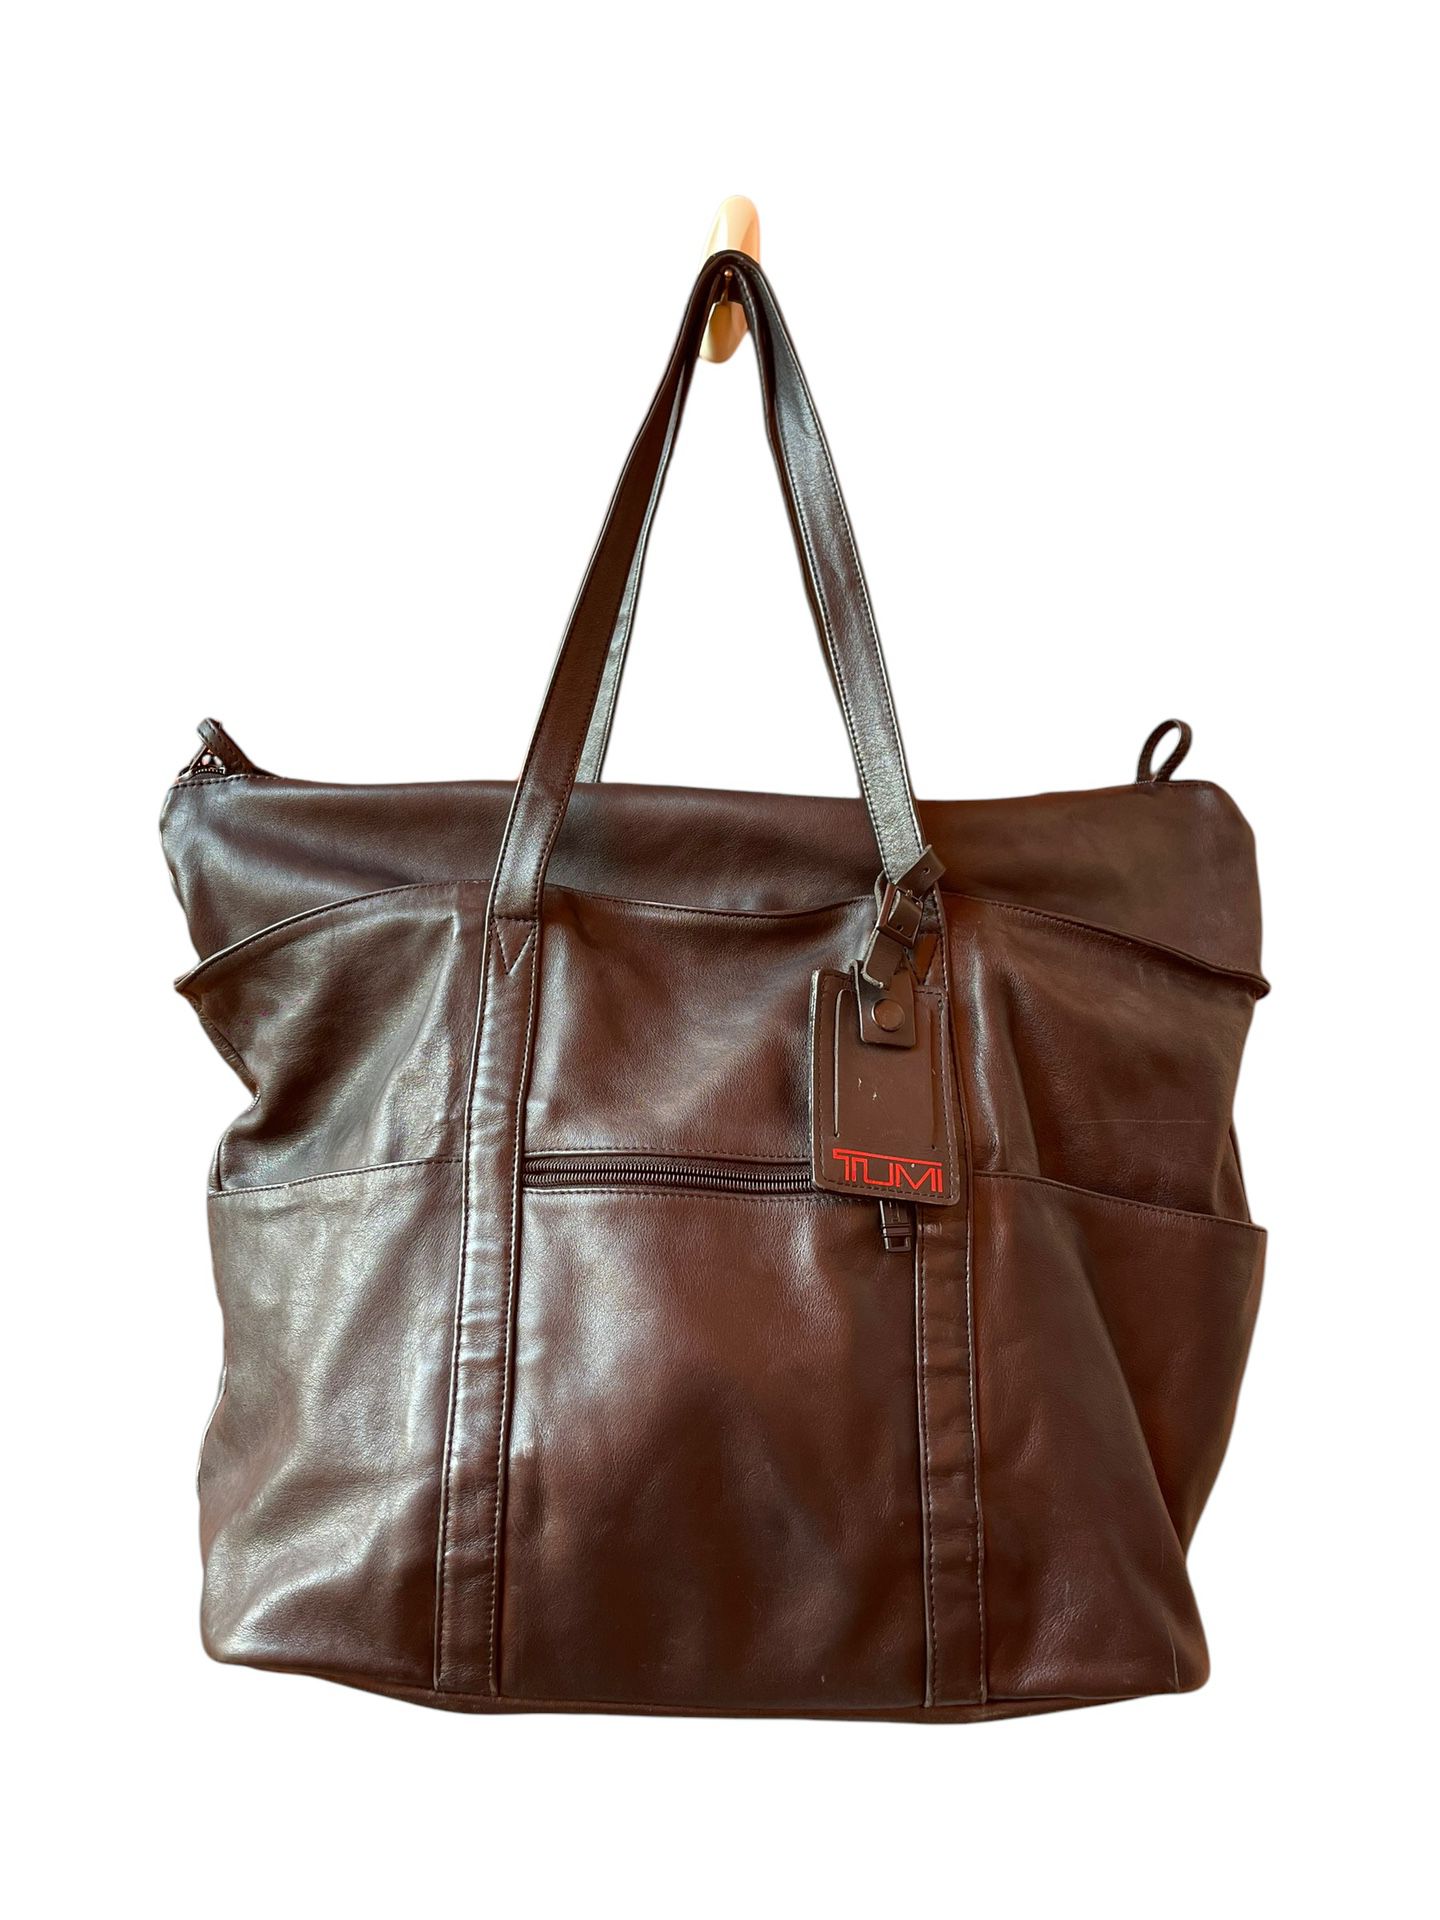 Tumi Alpha Nappa Leather Large Carry-on Weekender Tote Bag, *45L